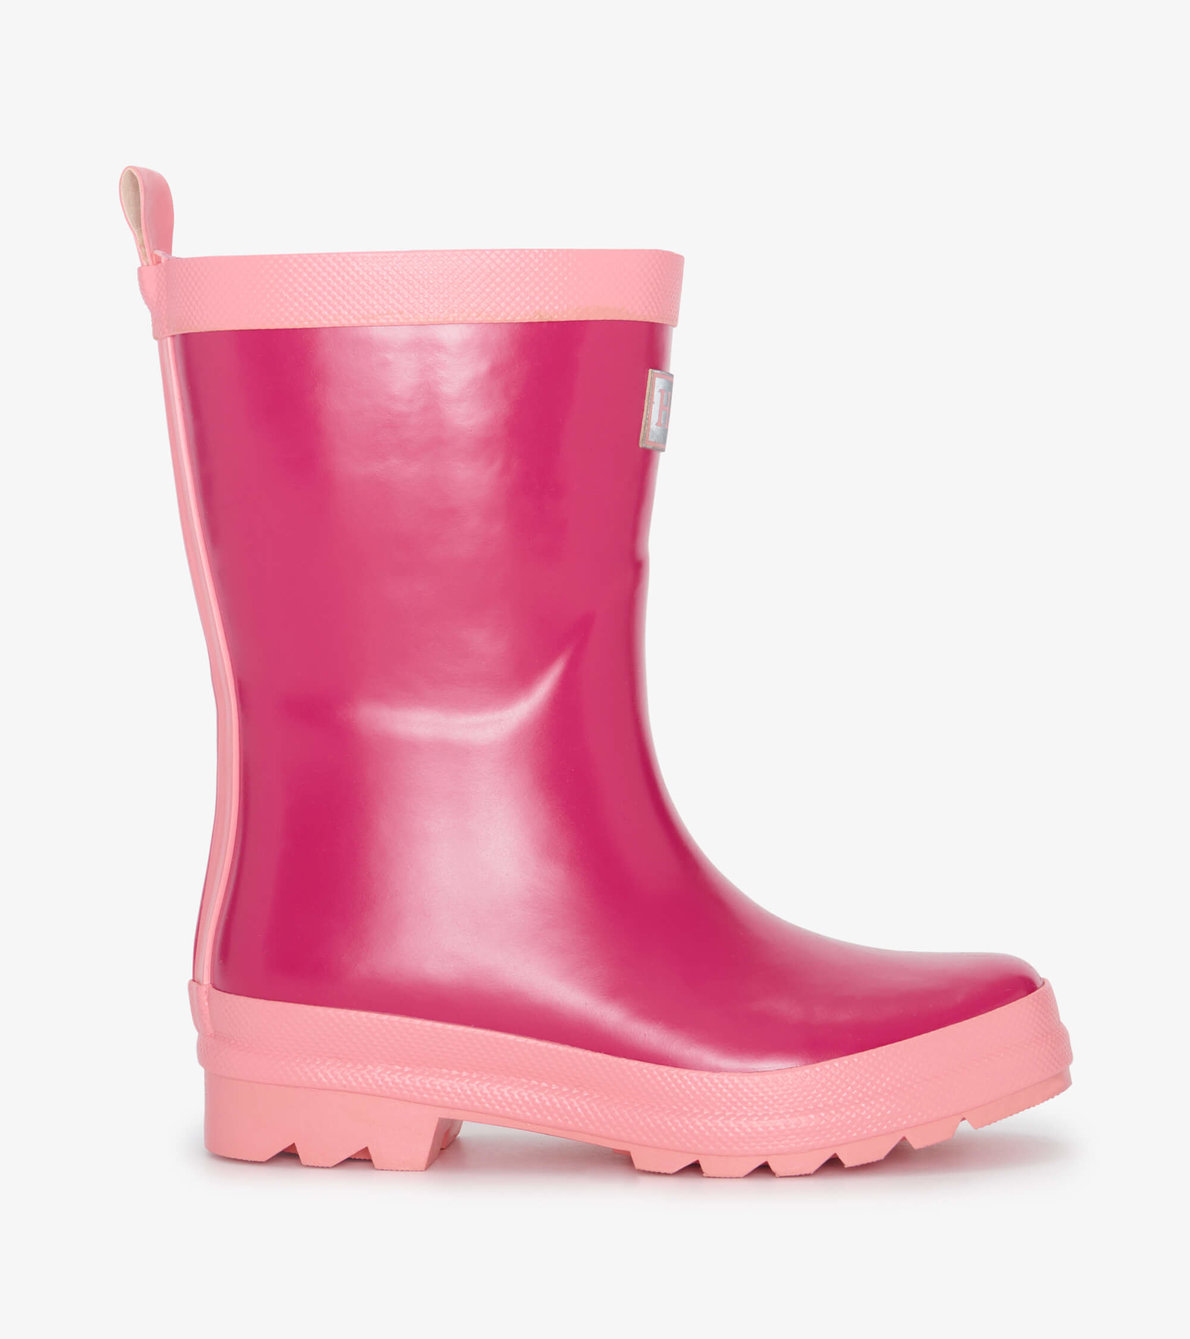 View larger image of Pink Shiny Rain Boots